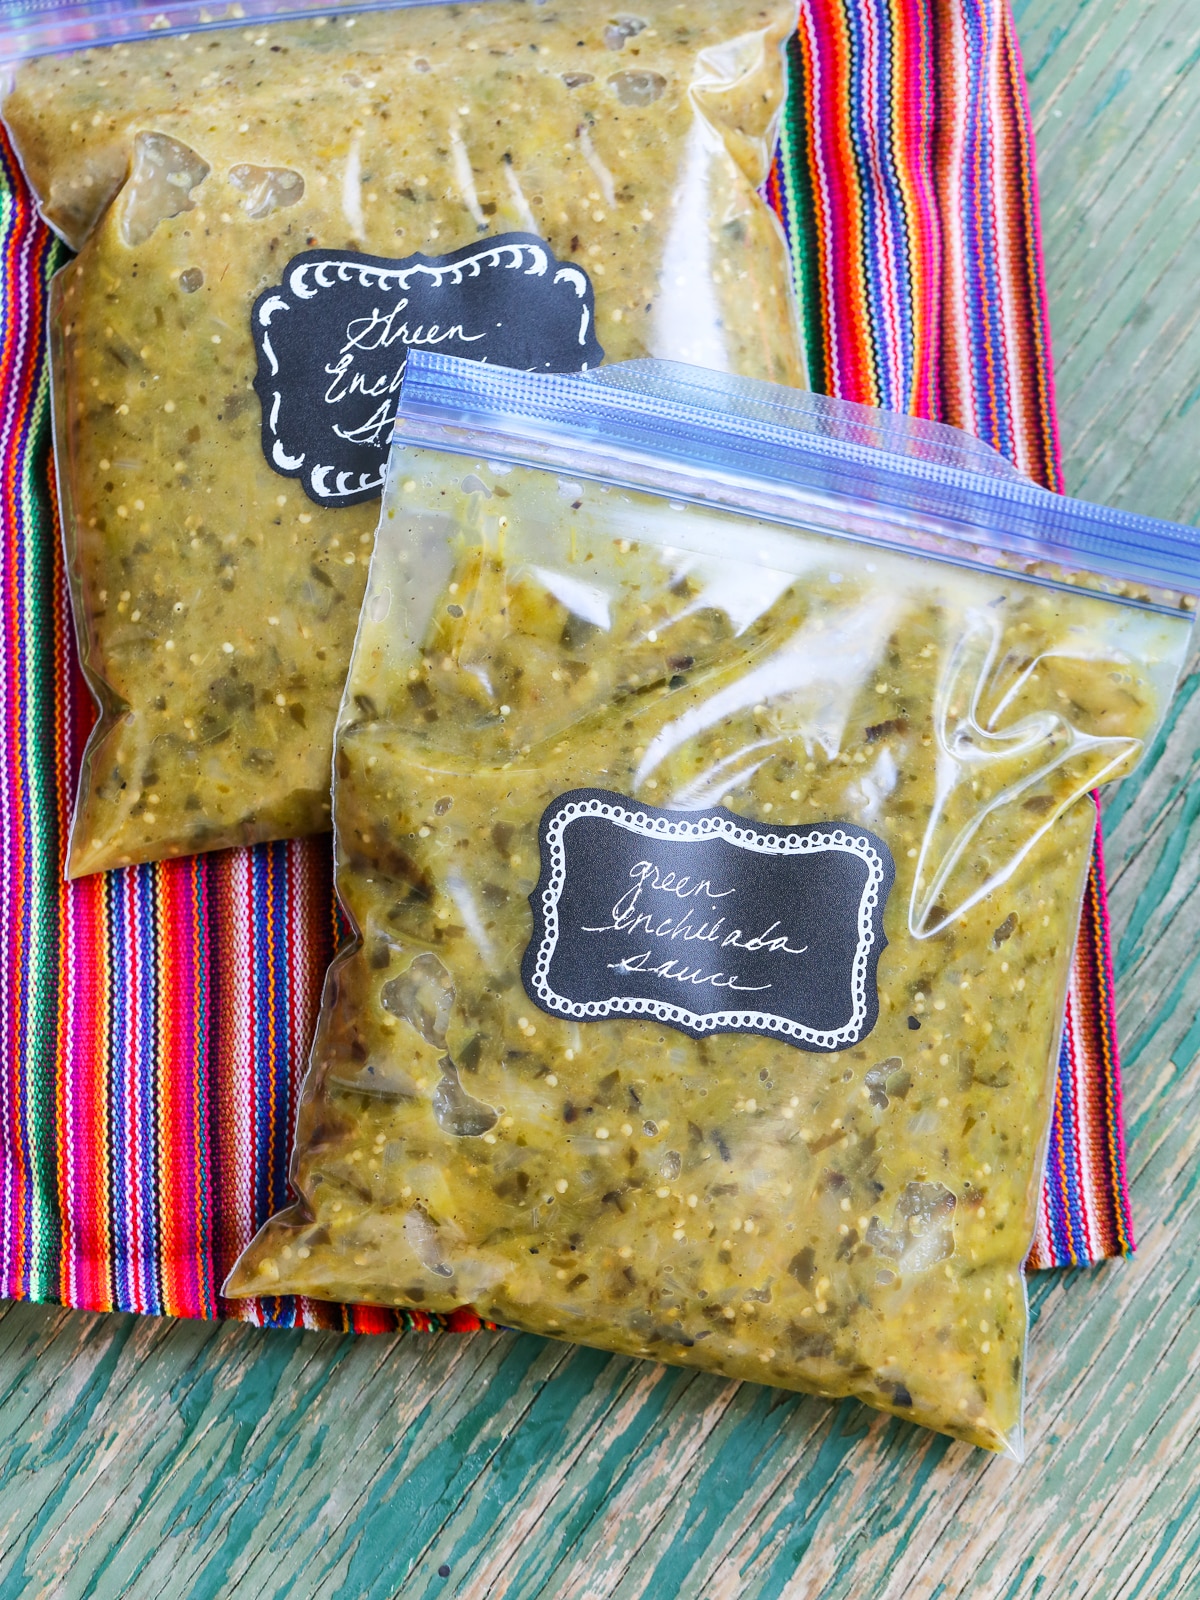 Two zip topped plastic freezer bags filled with green enchilada sauce on a colorful striped piece of cloth.